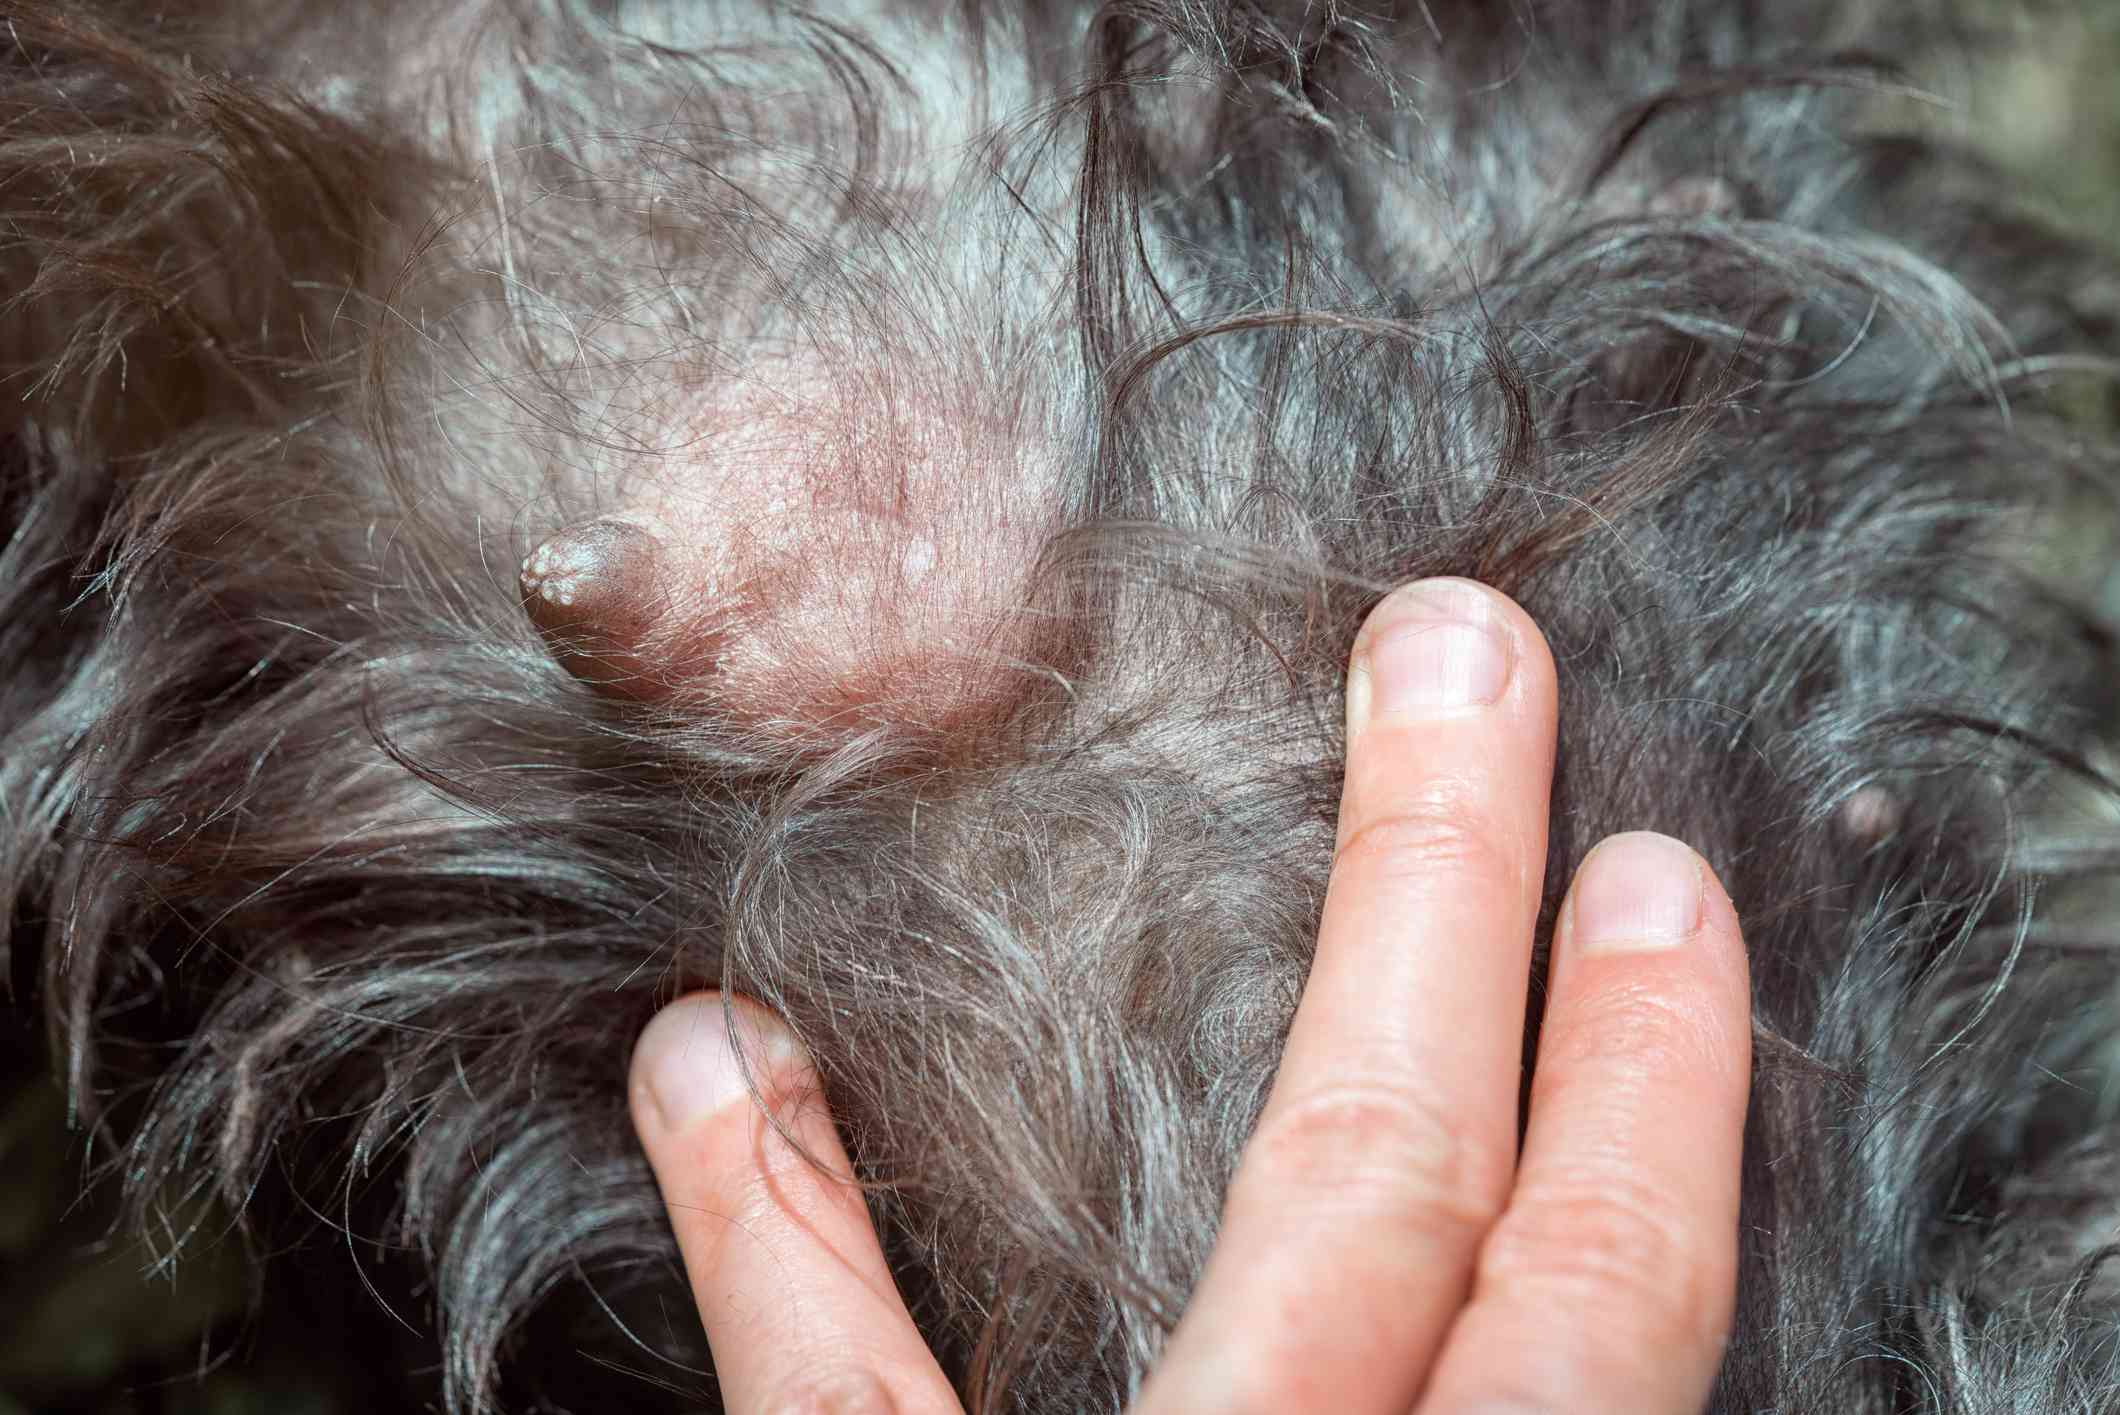 Mastitis in one mammary gland of a dog with dark fur close-up.